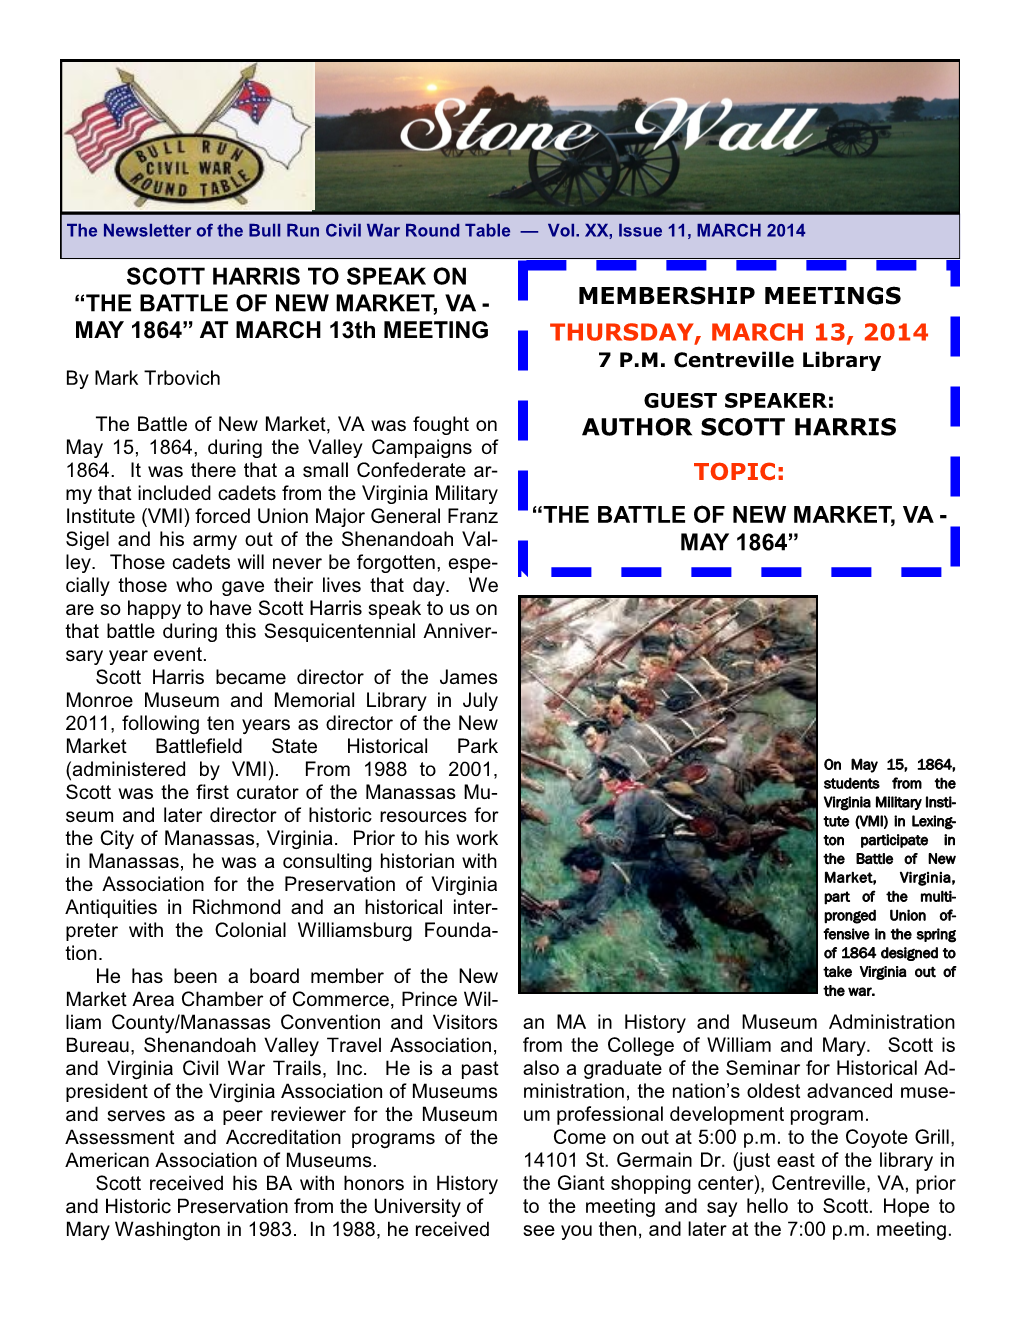 “THE BATTLE of NEW MARKET, VA - MAY 1864” at MARCH 13Th MEETING THURSDAY, MARCH 13, 2014 7 P.M